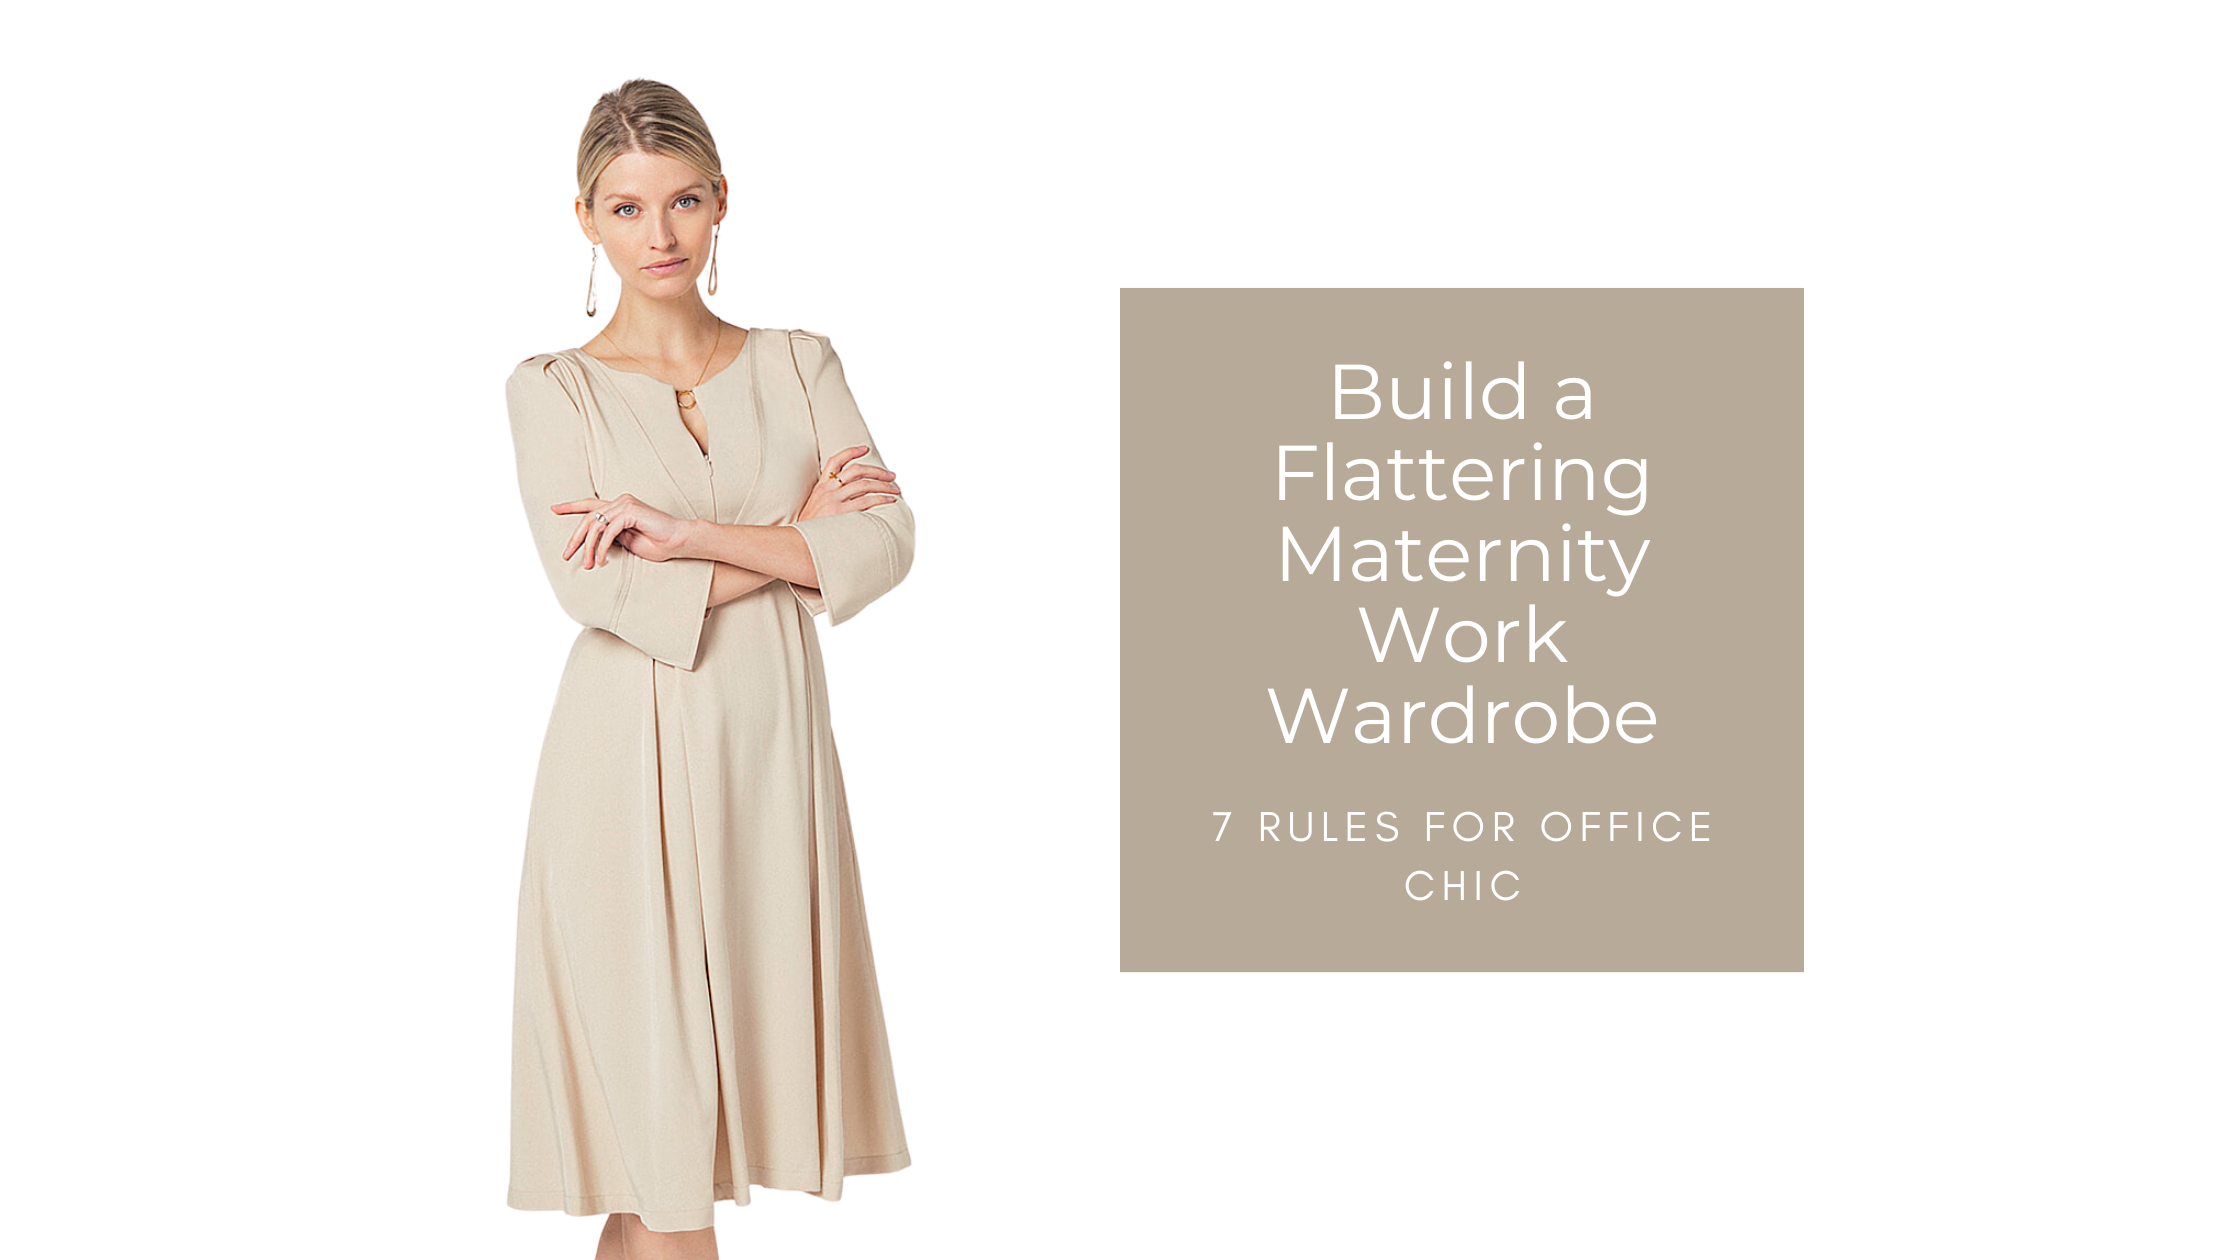 7 Rules to Building a Flattering Maternity Clothes Wardrobe